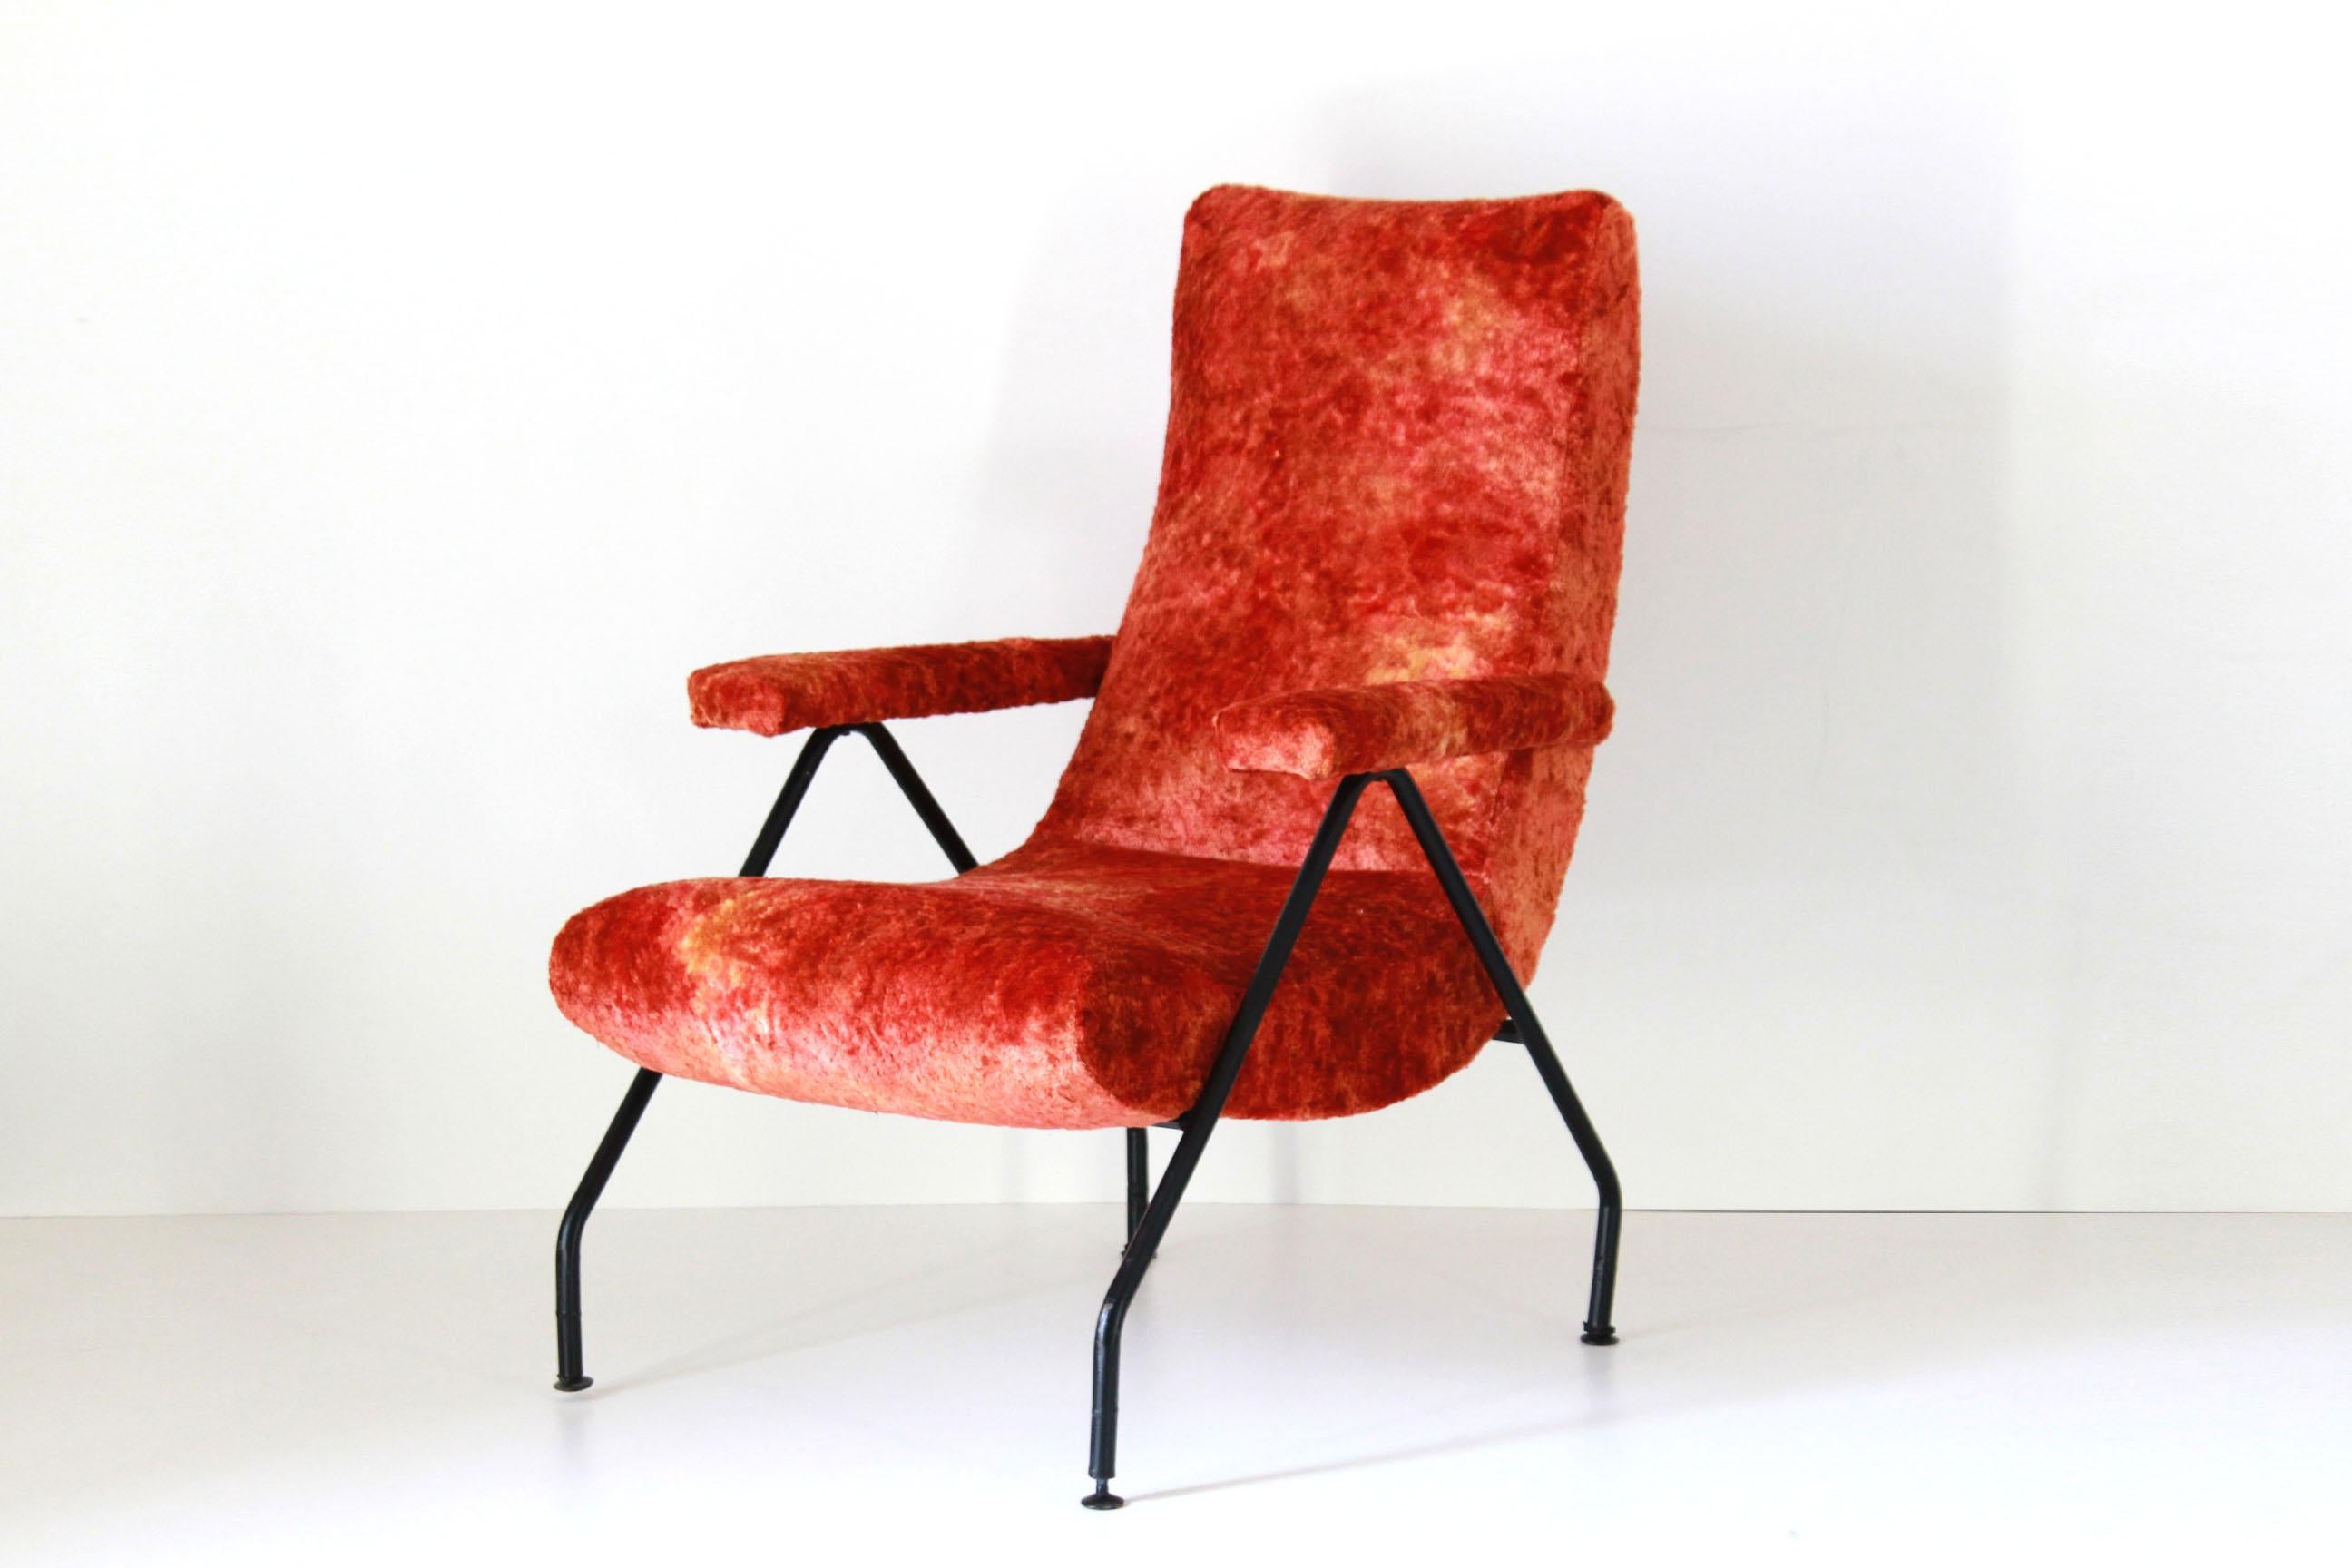 A 1950s vintage armchair with red cover and iron structure. The item has been fully restored. In excellent conditions.